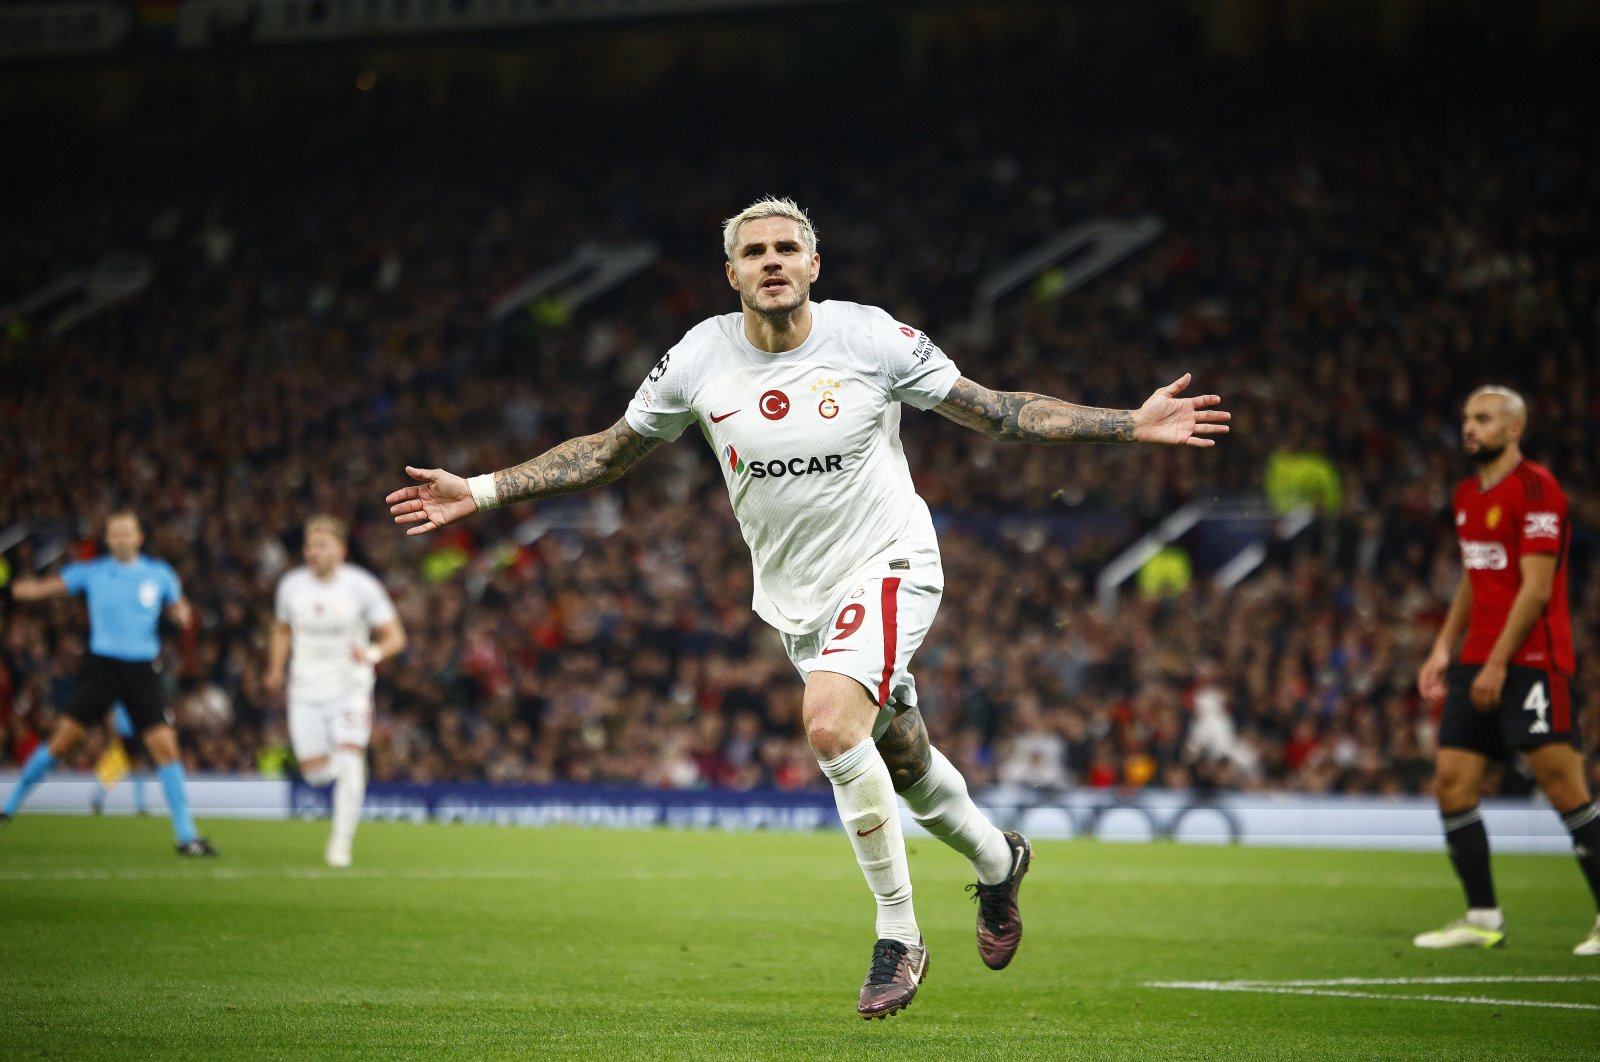 Galatasaray&#039;s Mauro Icardi celebrates after scoring his team&#039;s third goal during the UEFA Champions League match against Manchester United at Old Trafford, Manchester, U.K., Oct. 3, 2023. (Getty Images Photo)